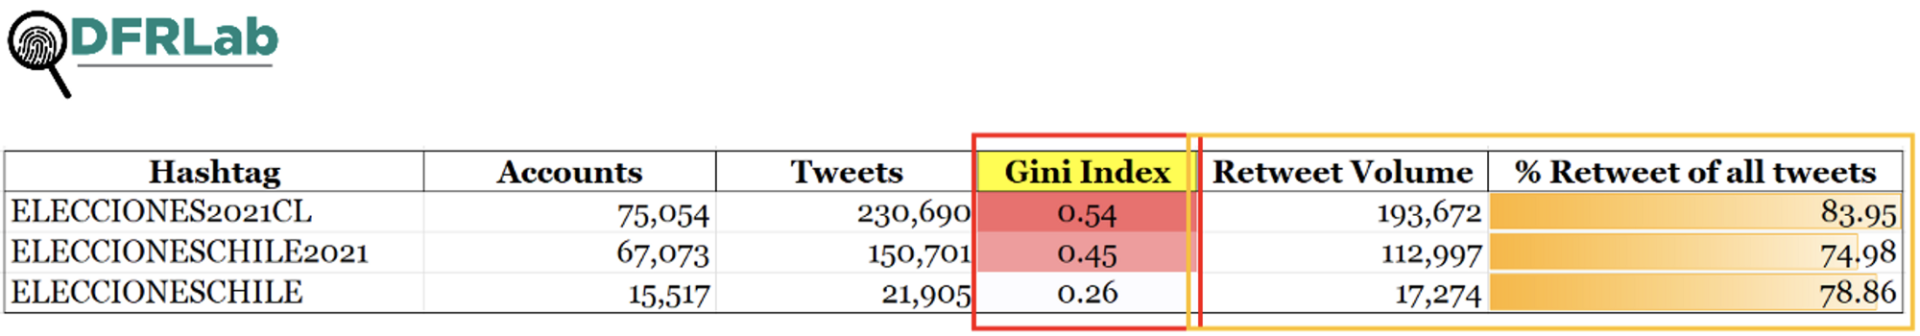 Table showing Gini index for the elections-related hashtags, along with other attributes, including number of accounts, total number of tweets, and the retweet proportion of all tweets.